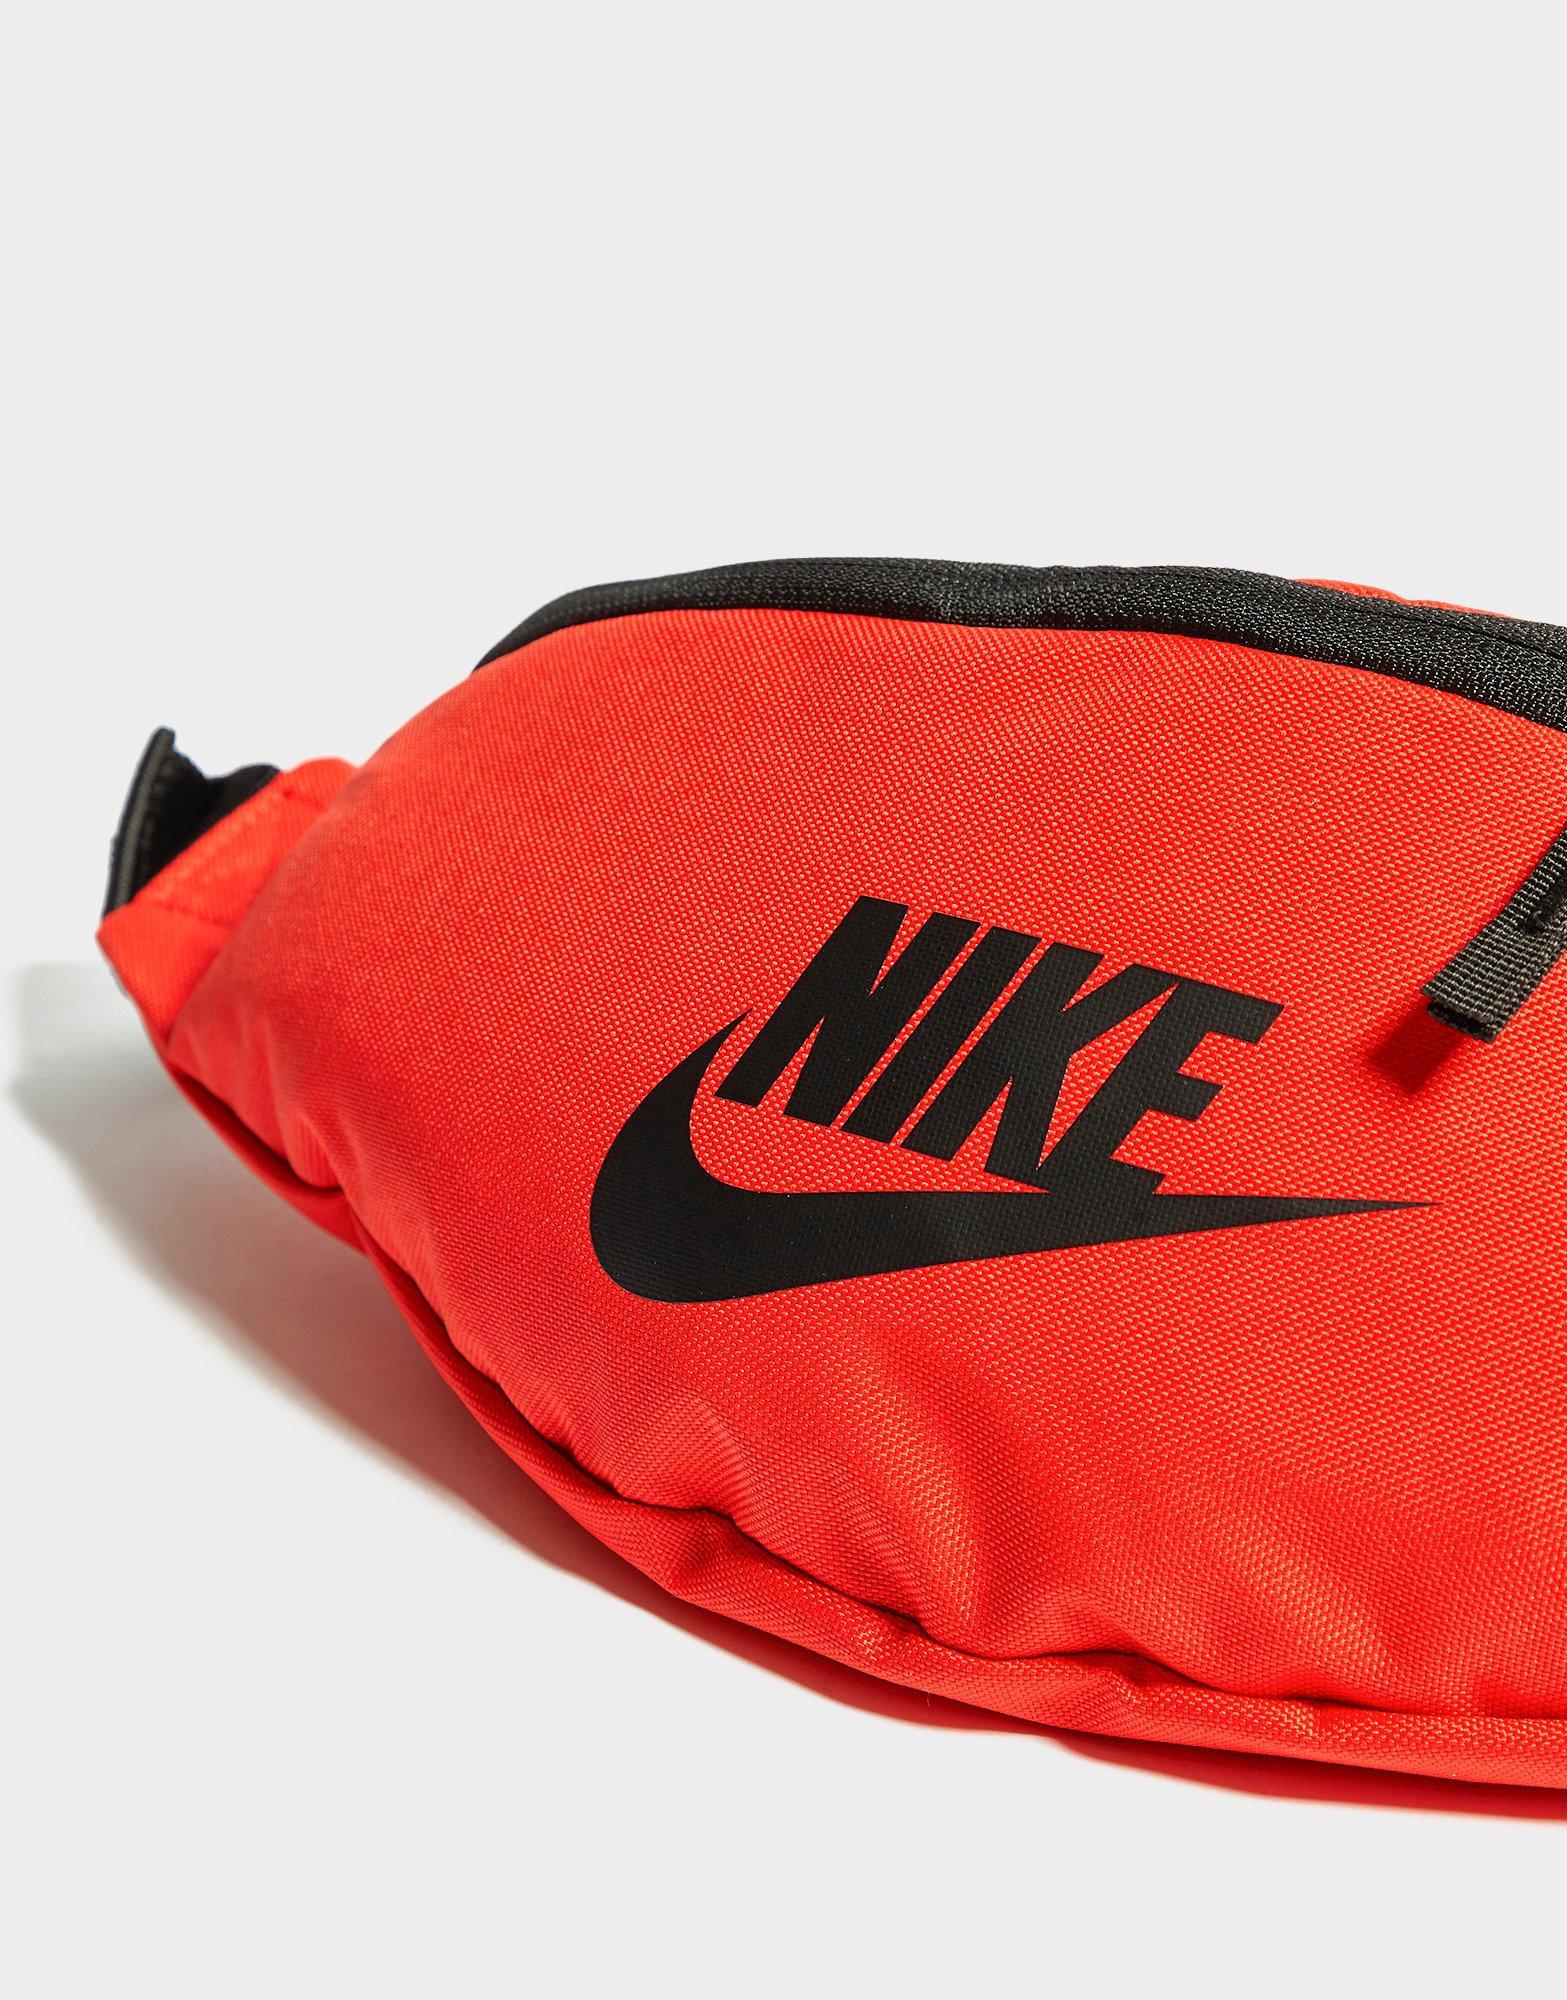 Nike Synthetic Waist Bag in Red/Black (Red) for Men - Lyst